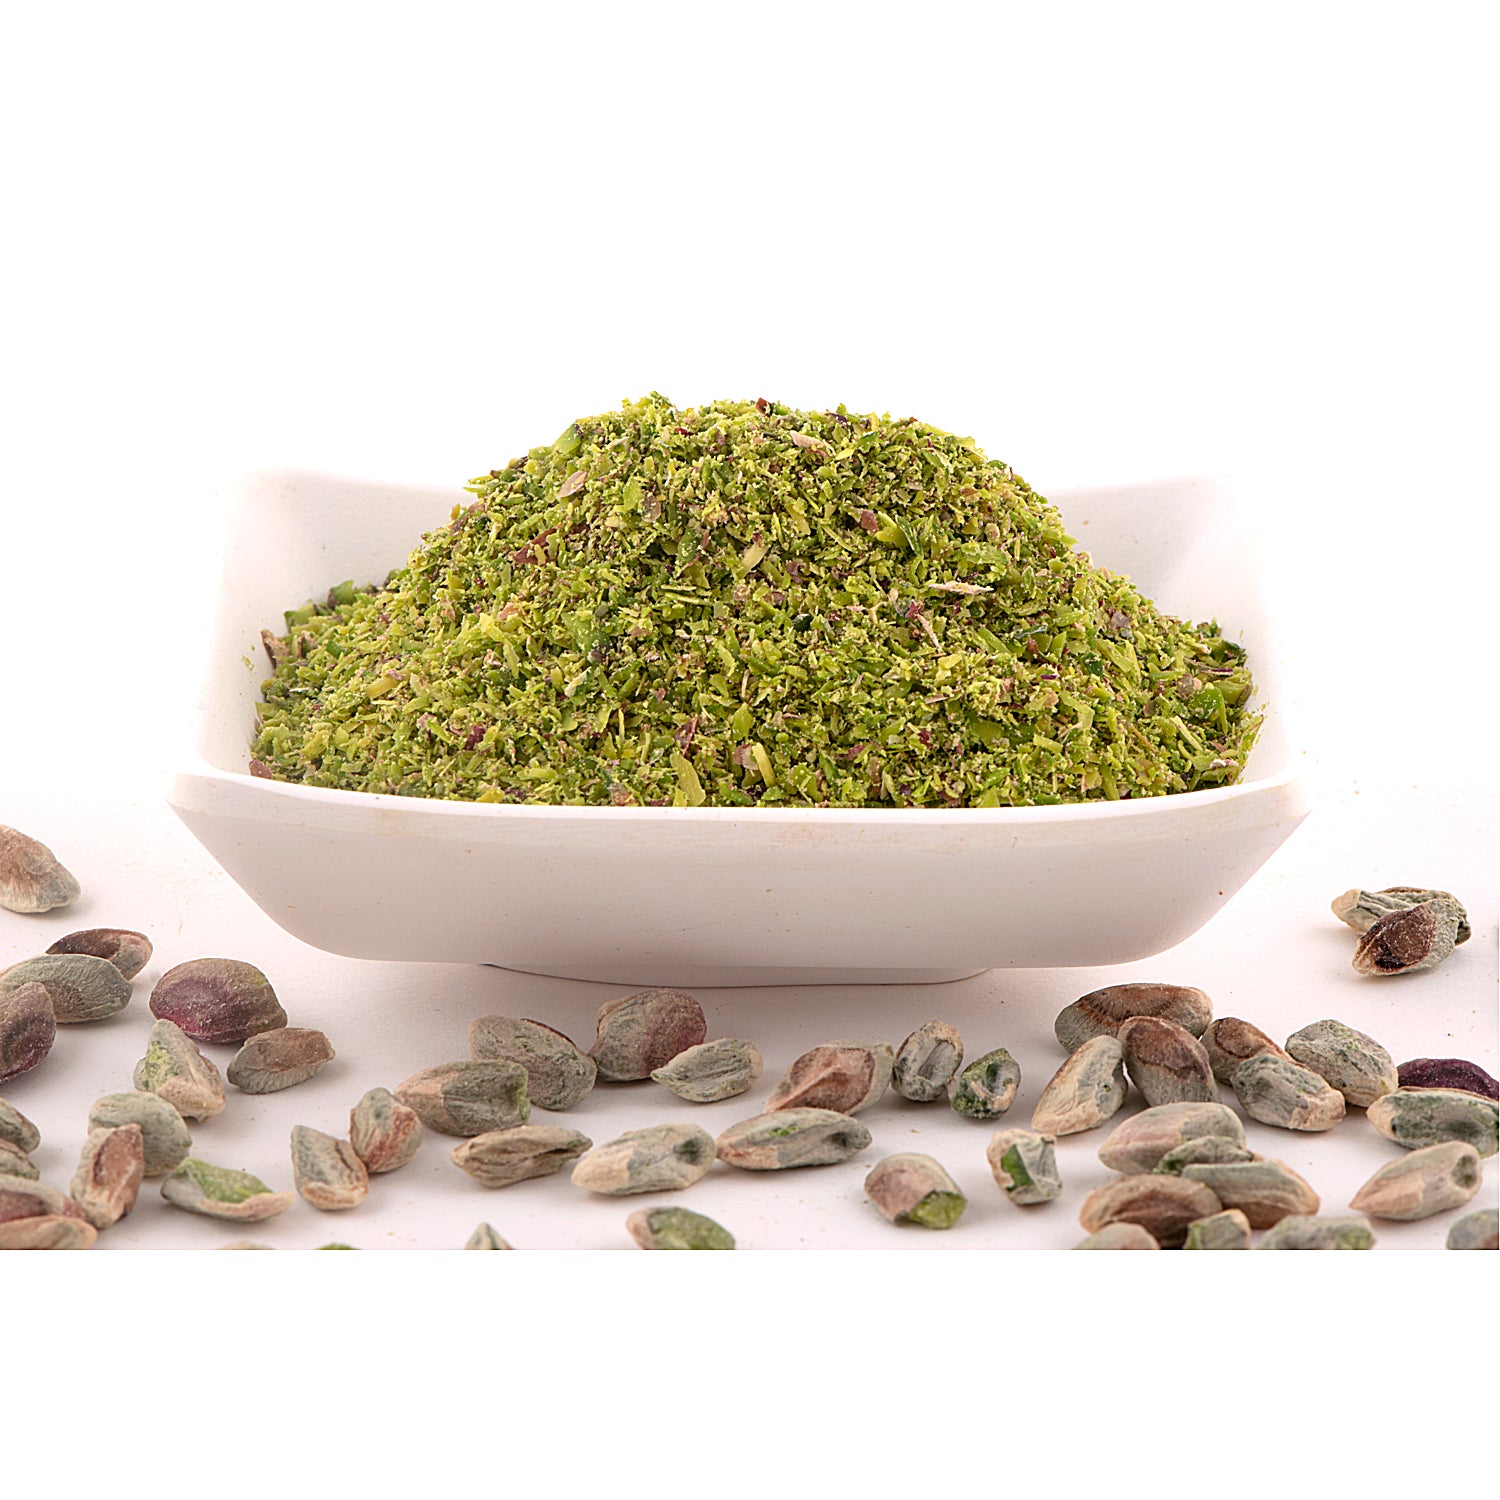 How to Use and Store Pistachio Flour?